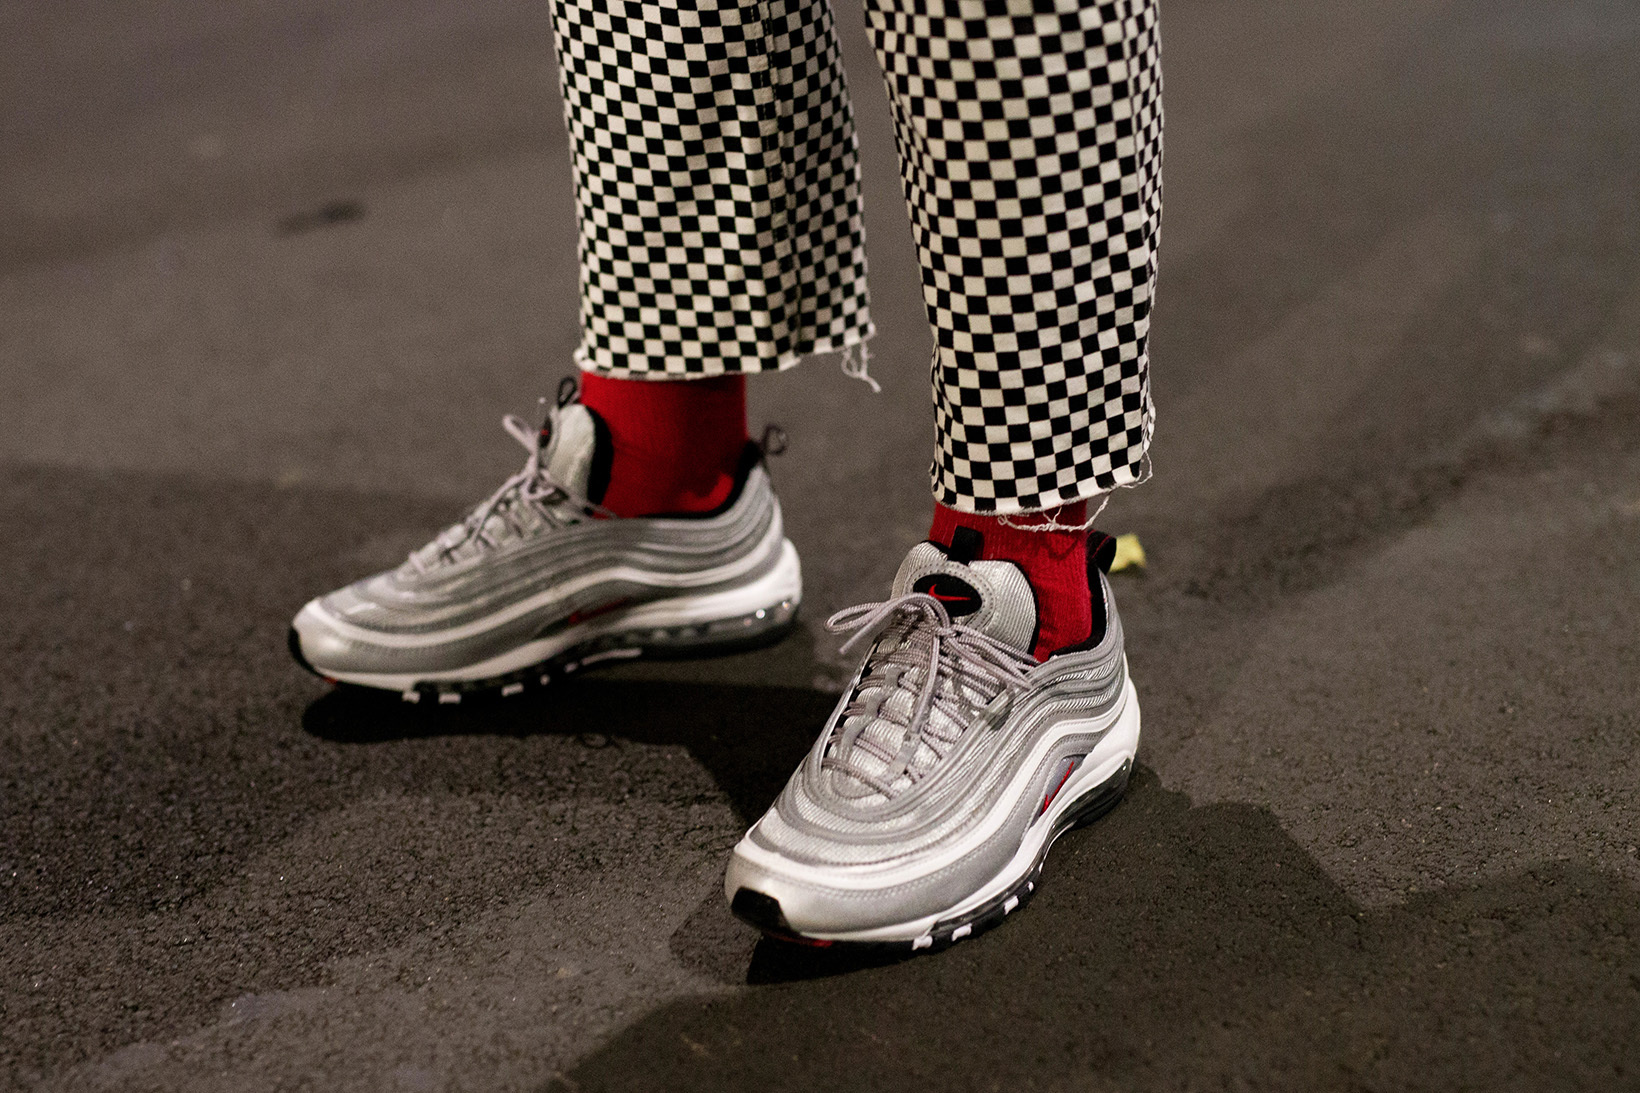 styling nike air max 97